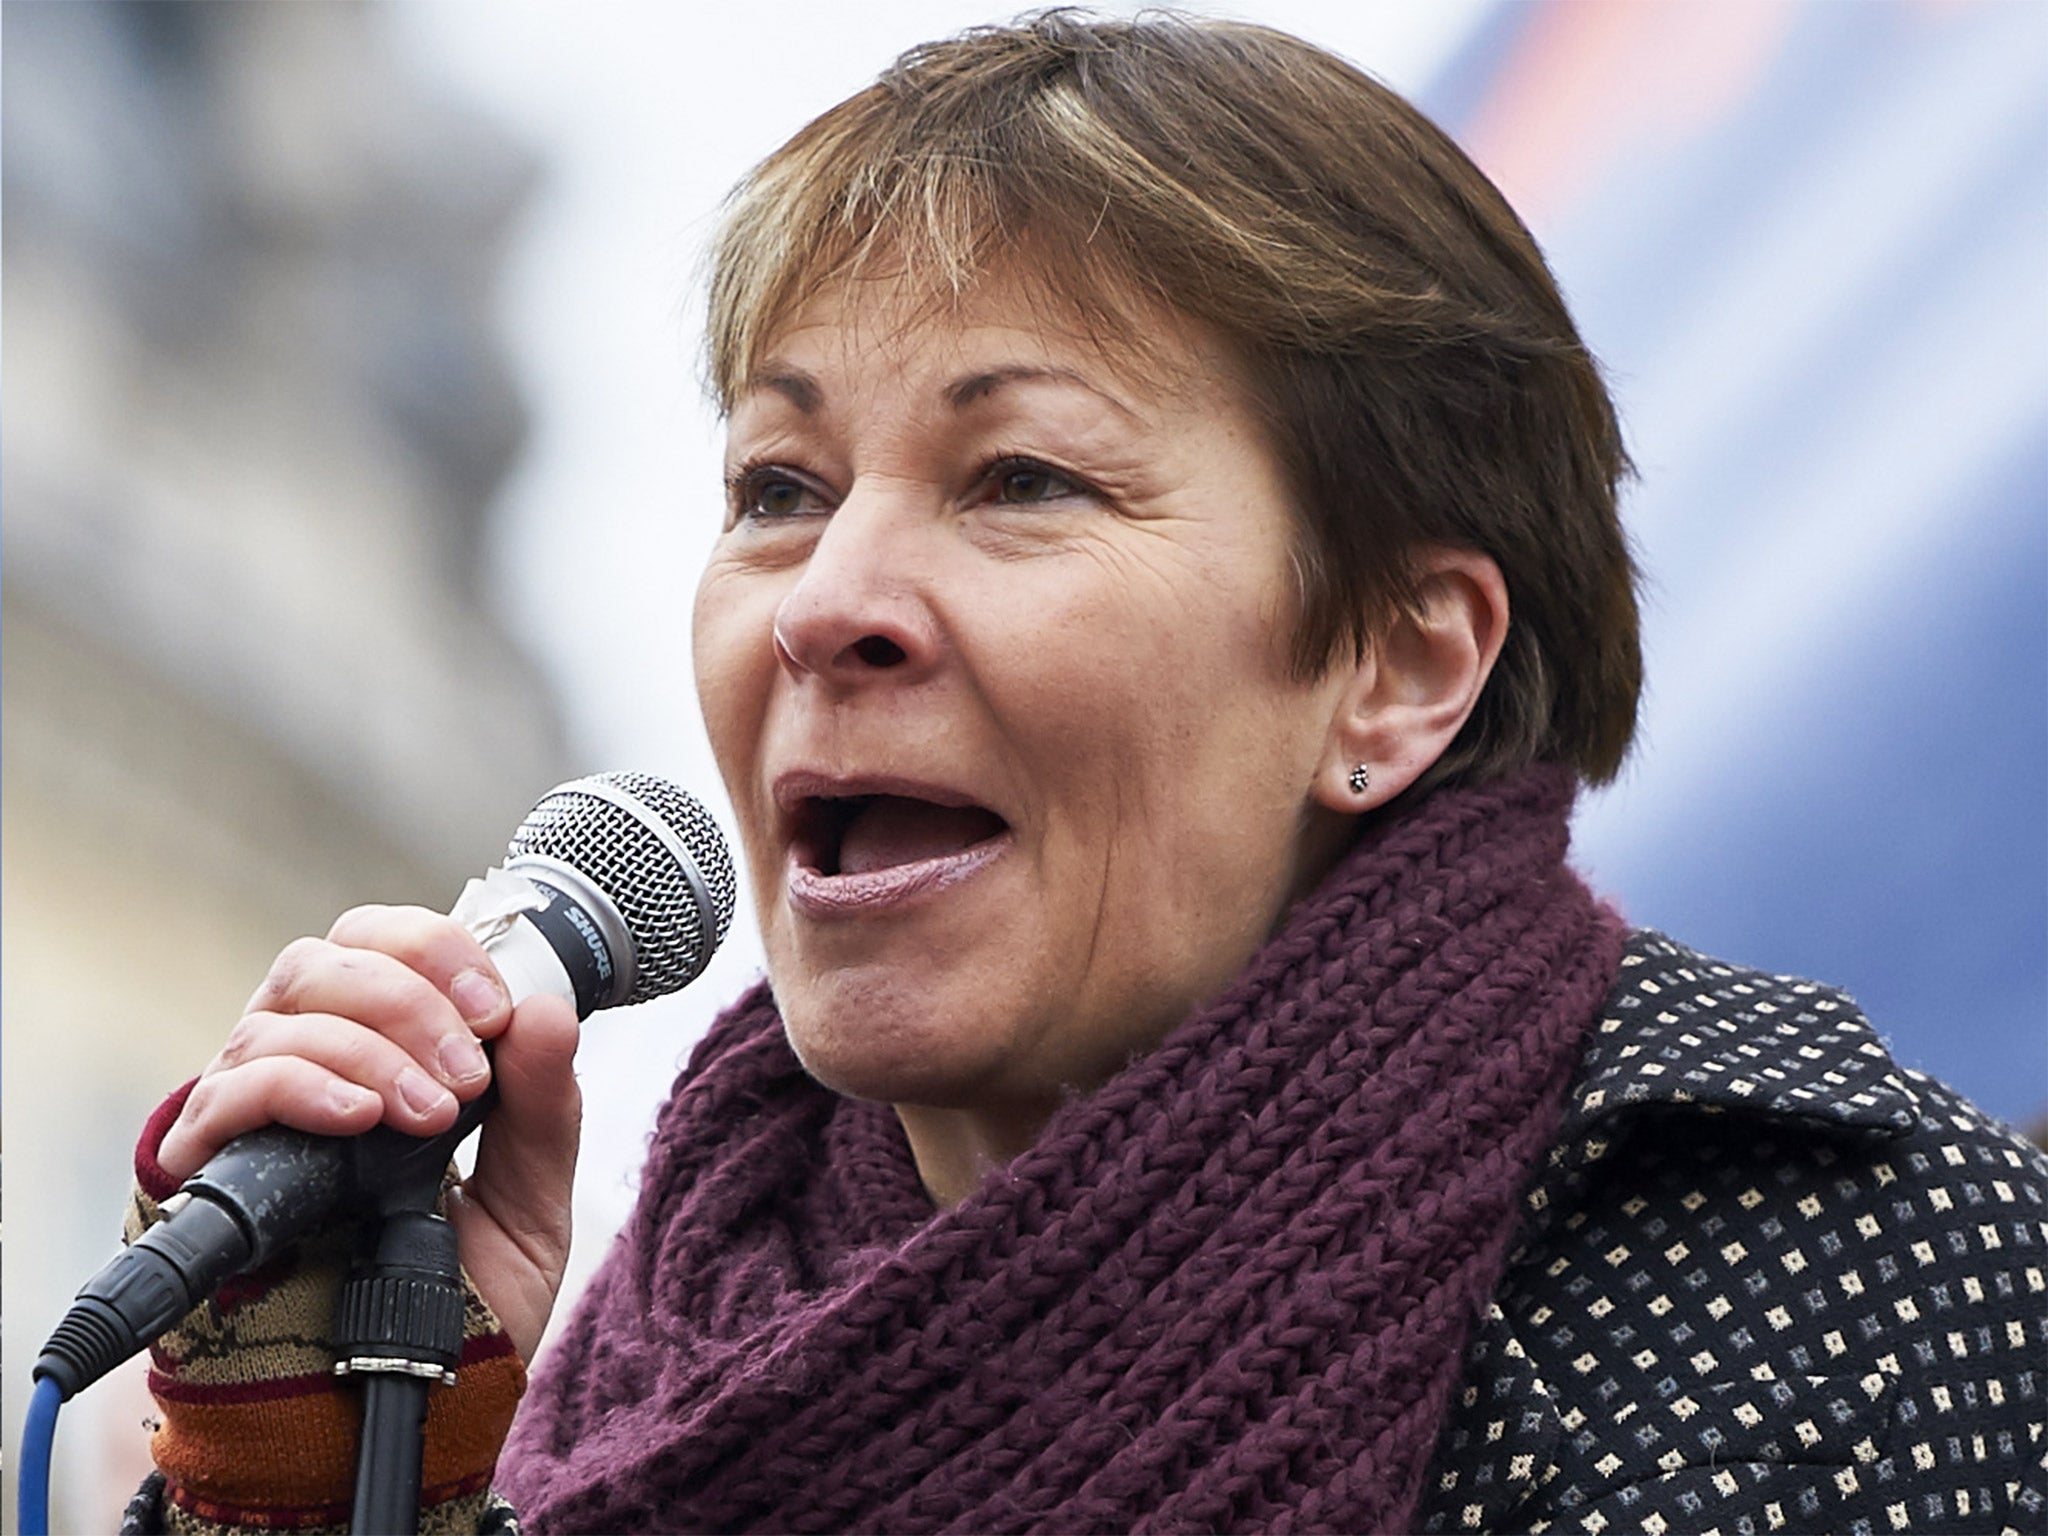 Green MP Caroline Lucas has said a pact could benefit both parties